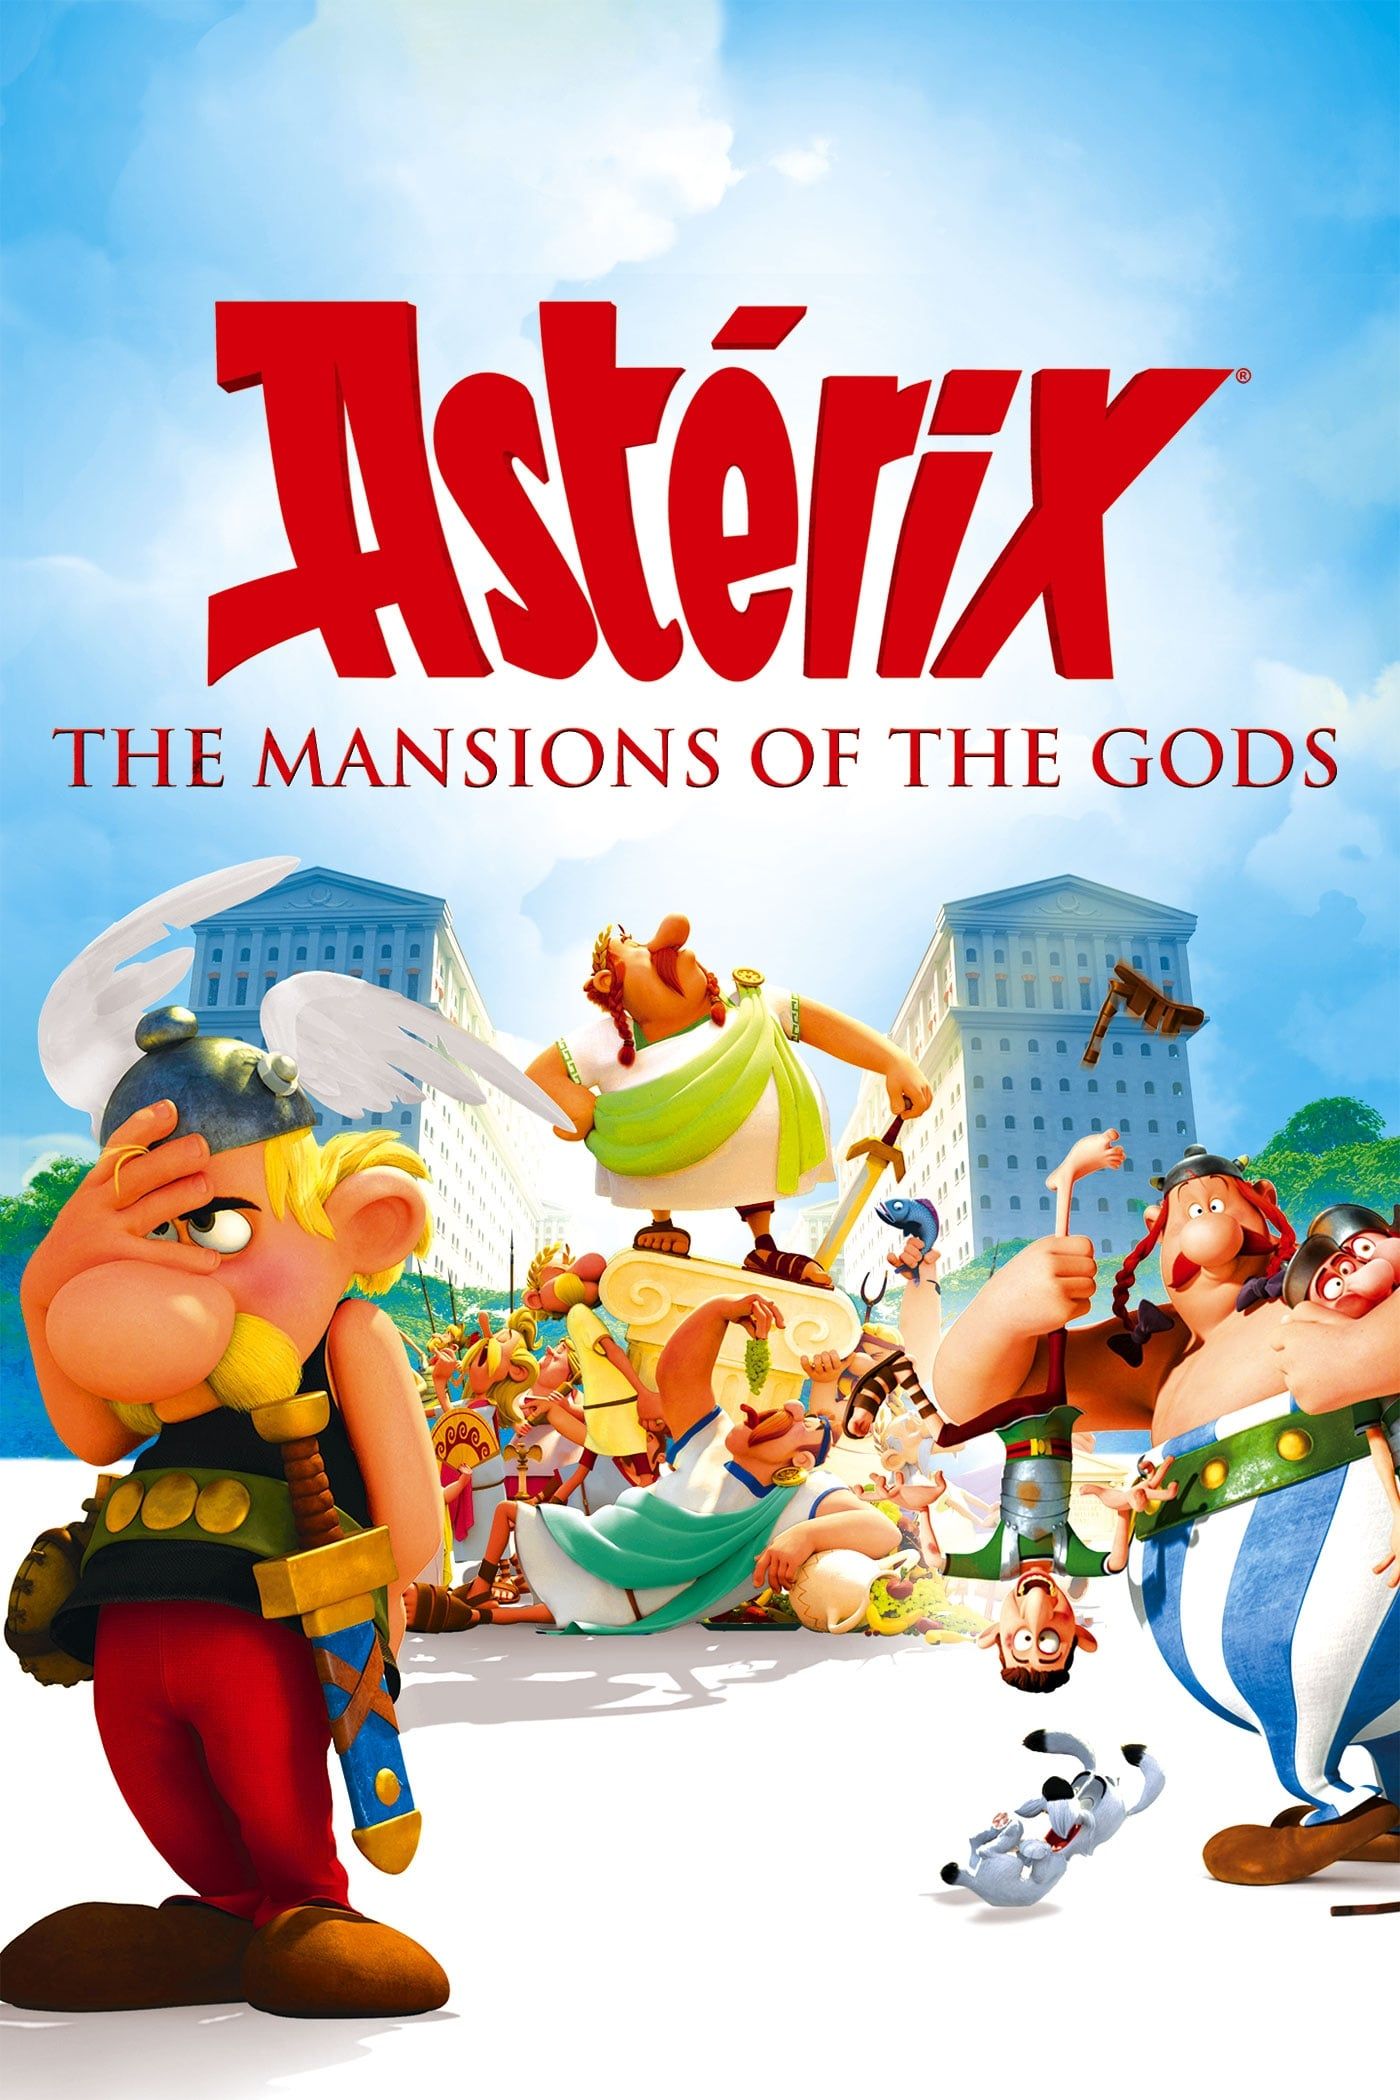 Asterix: The Land of The Gods